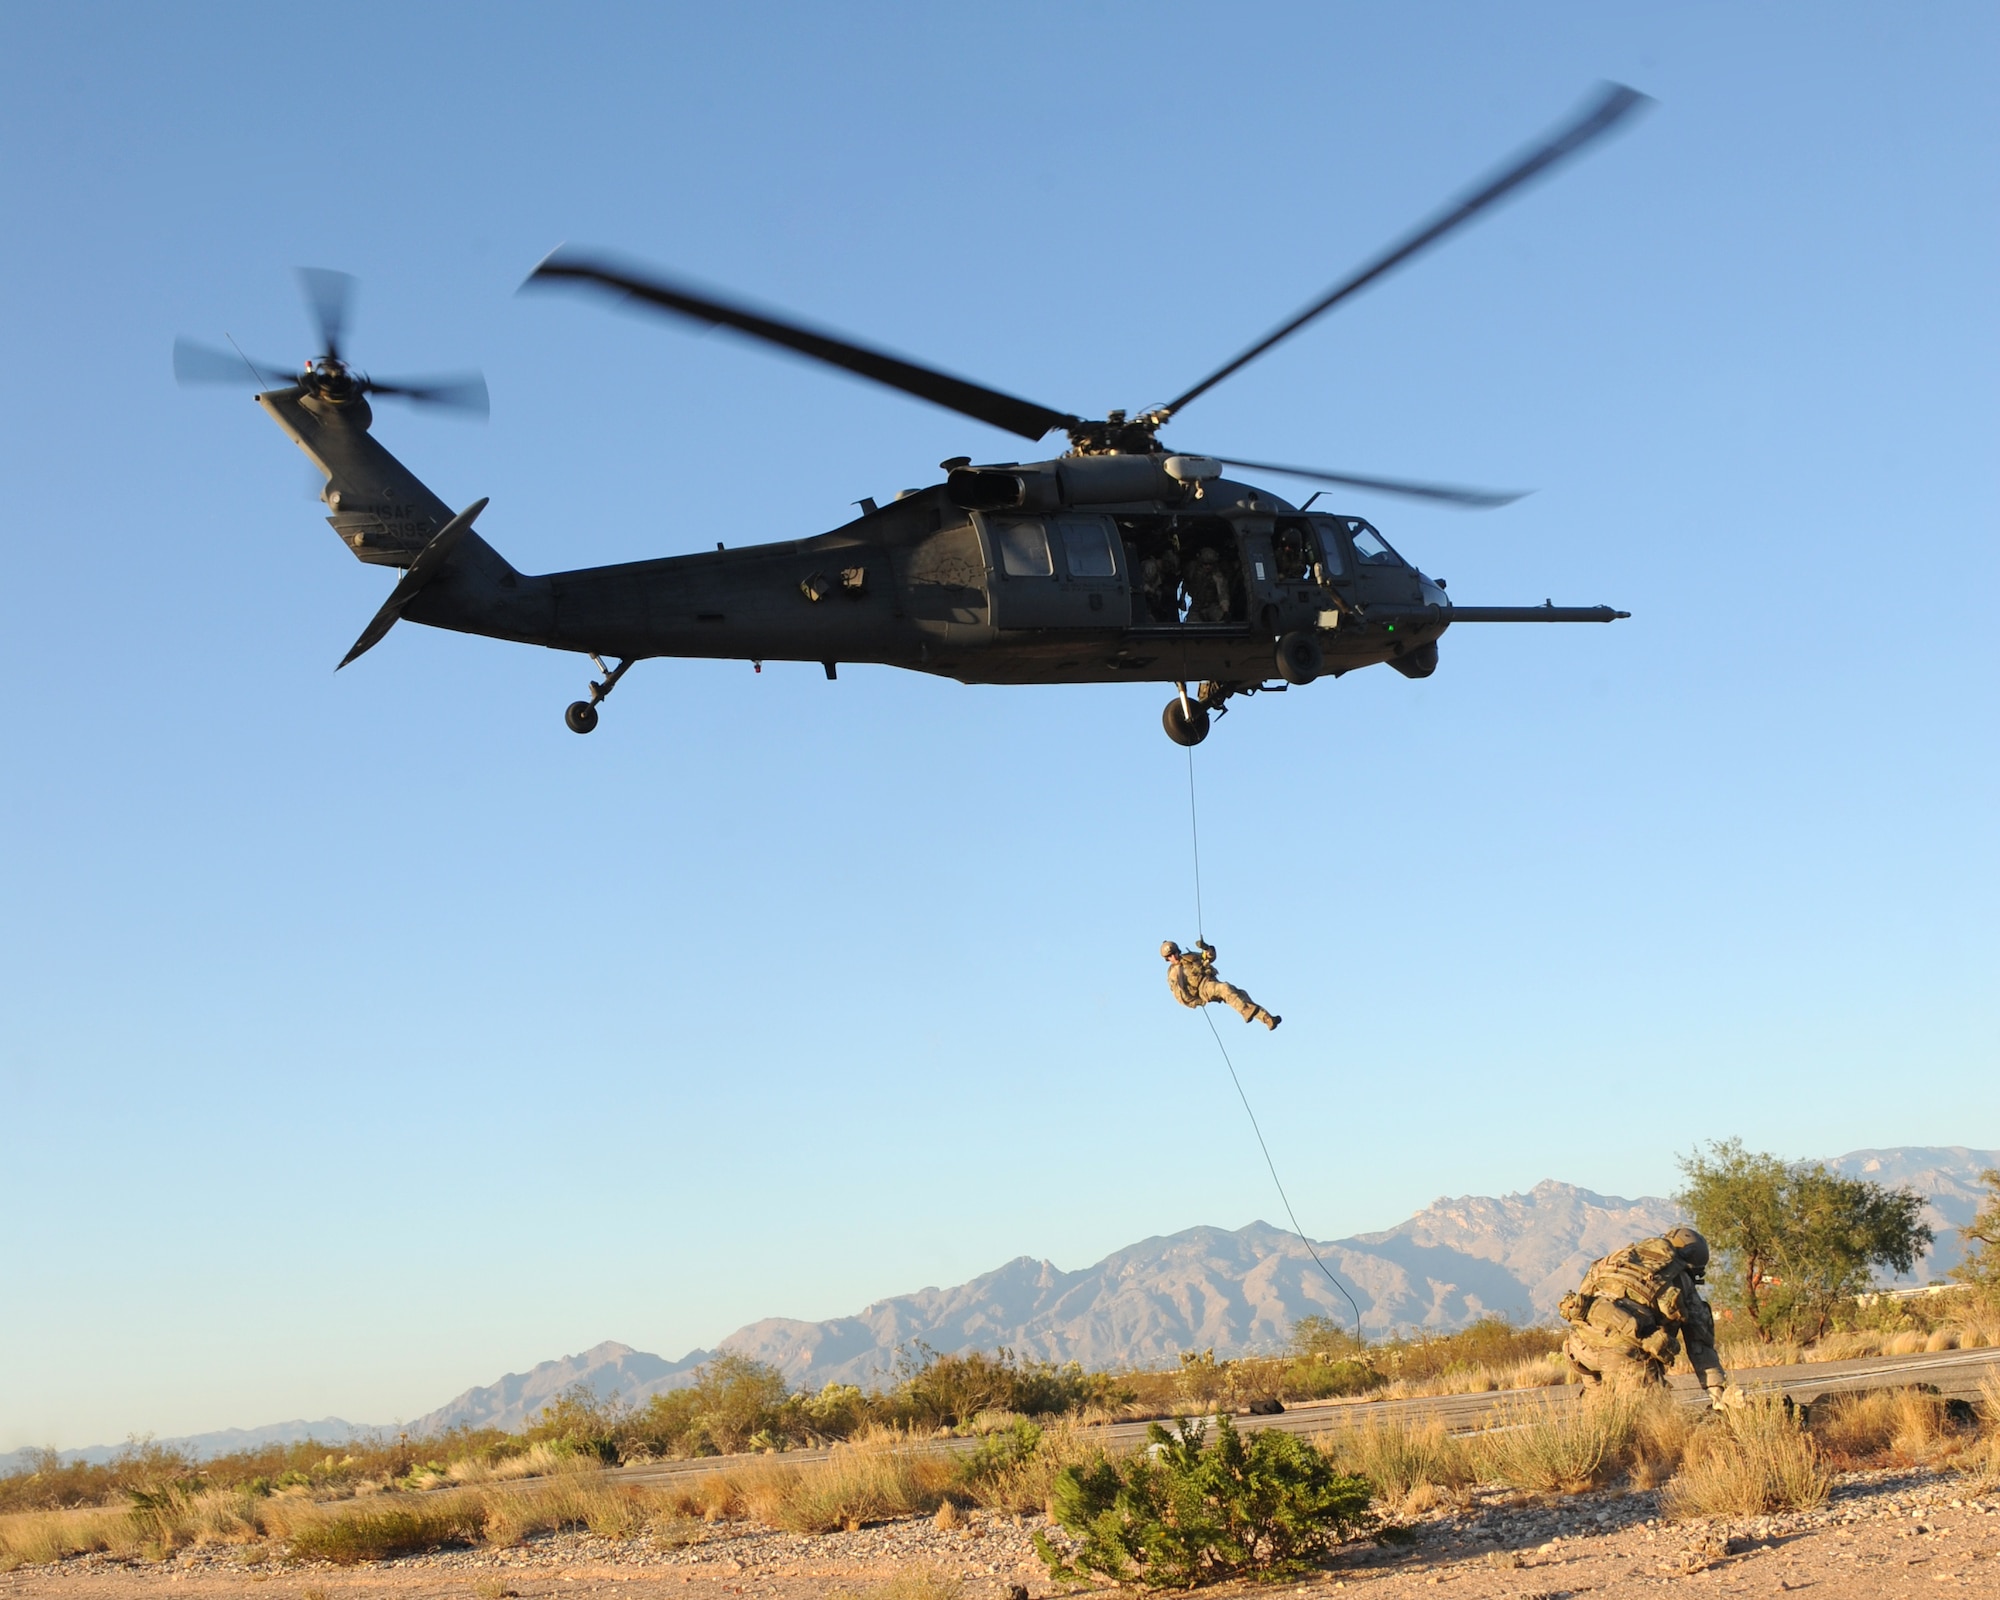 A U.S. Air Force pararescueman from the 48th Rescue Squadron at Davis-Monthan Air Force Base, Ariz., rappels from a 55th Rescue Squadron HH-60 Pavehawk during alternate insertion and extraction training  here, Nov. 13, 2013. The pararescuemen were participating in the exercise as part of their upgrade training. (U.S. Air Force photo by 1st Lt Sarah Ruckriegle/released) 